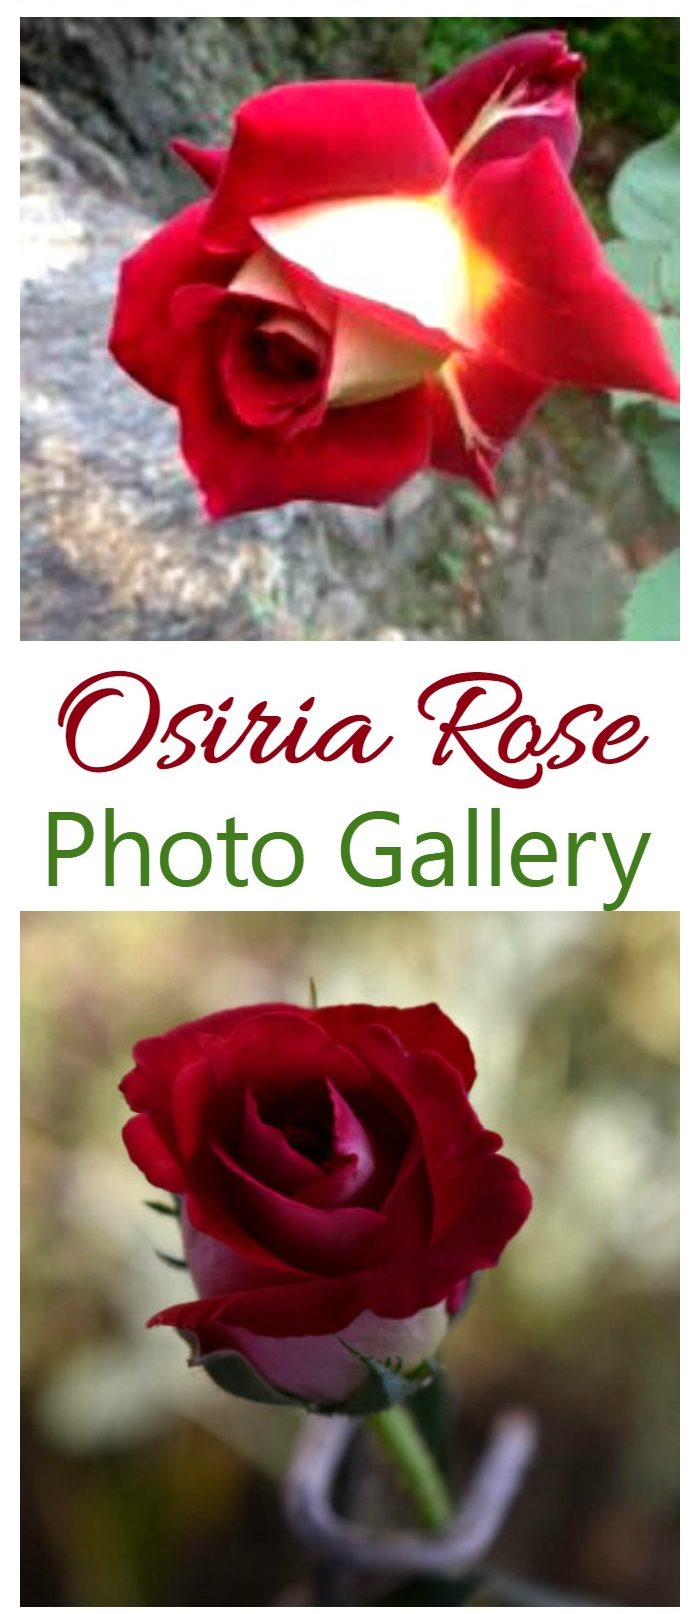 Osiria Rose Photo Gallery of This hard to find Hybrid Tea Rose